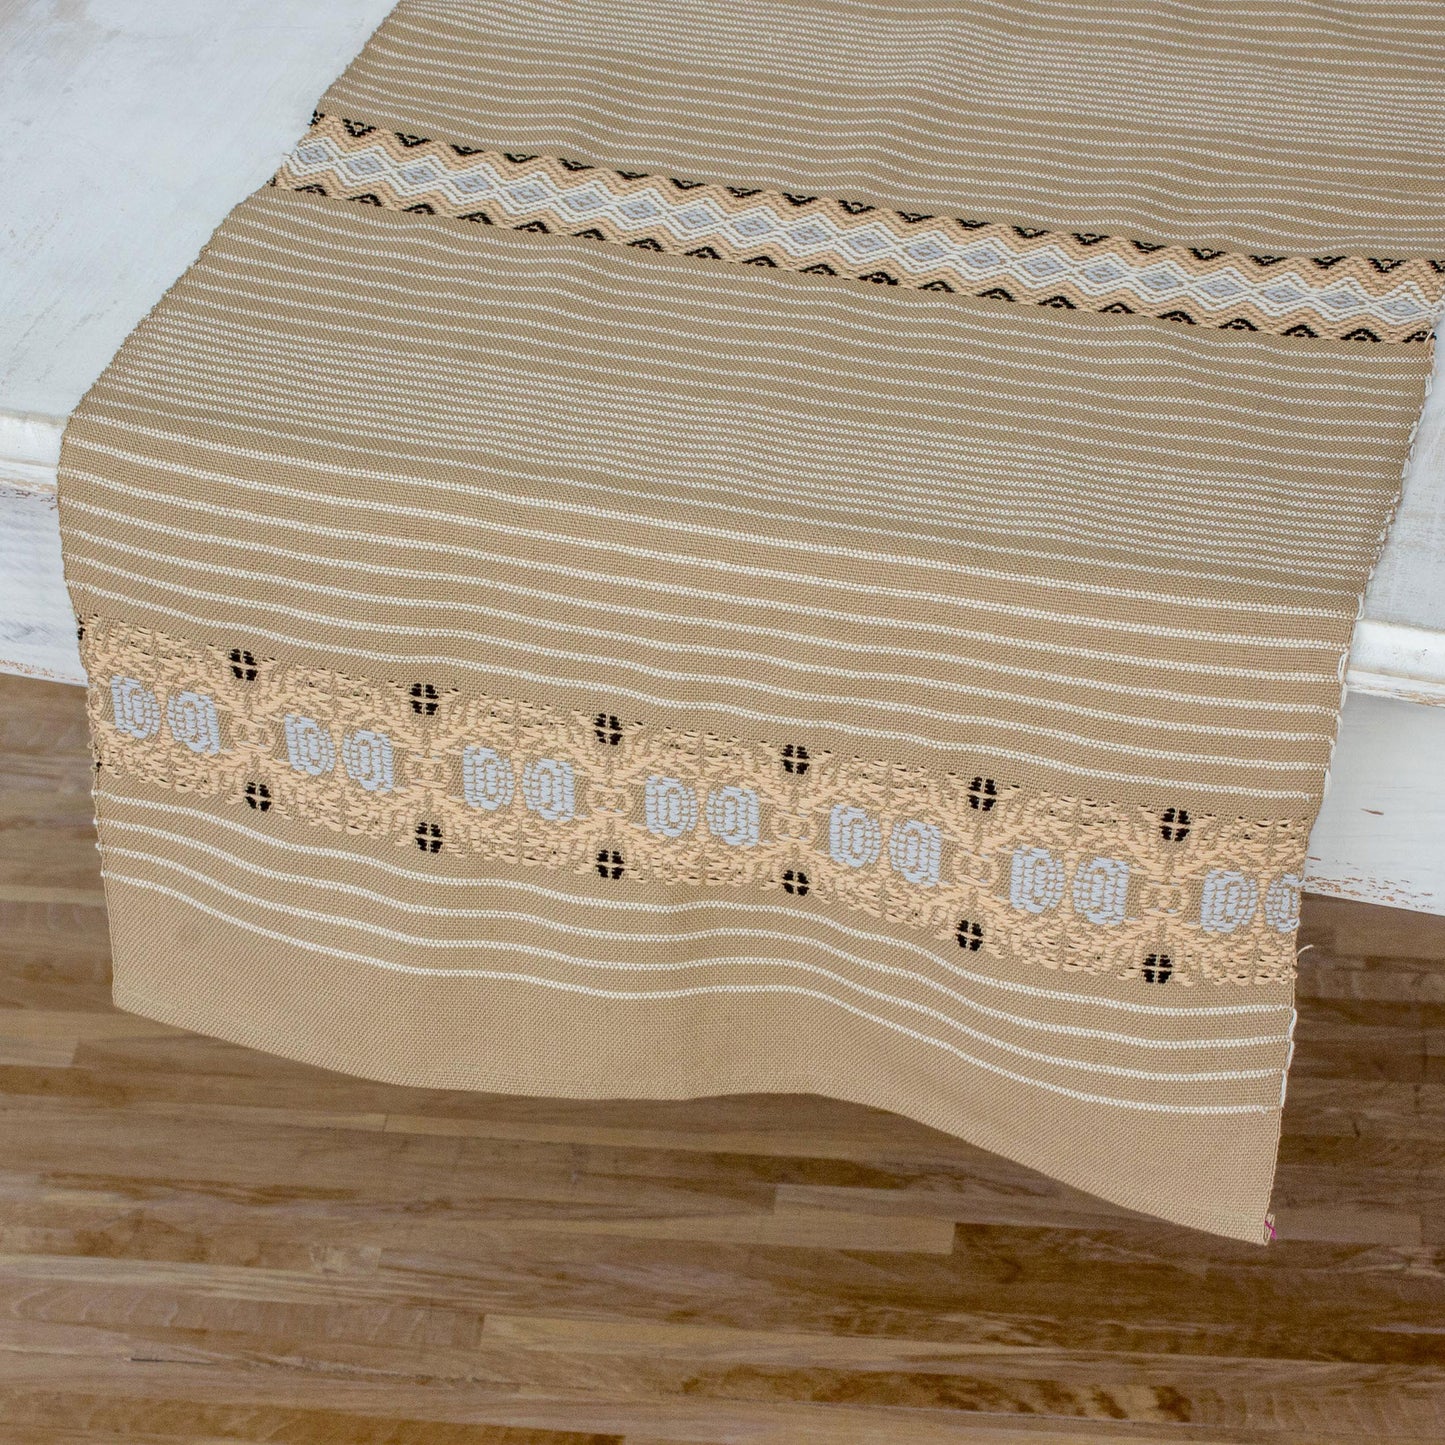 Striped Paths in Khaki Handwoven Striped Table Runner in Khaki from Guatemala